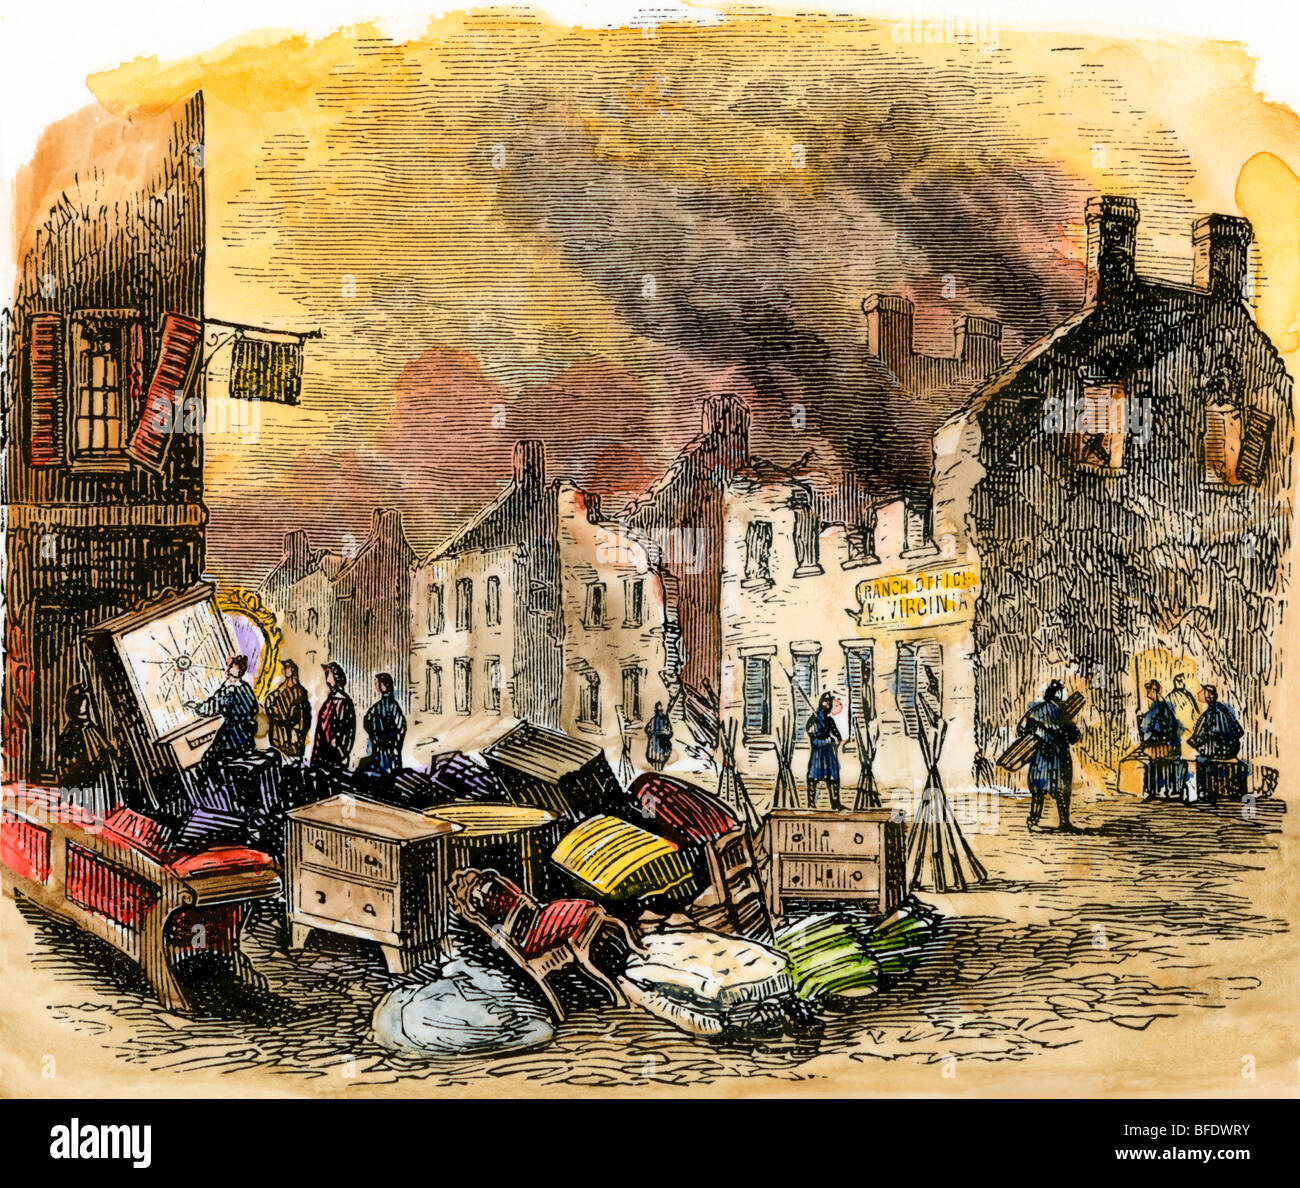 Fredericksburg, Virginia, after the Civil War siege and battle 1862. Hand-colored woodcut Stock Photo